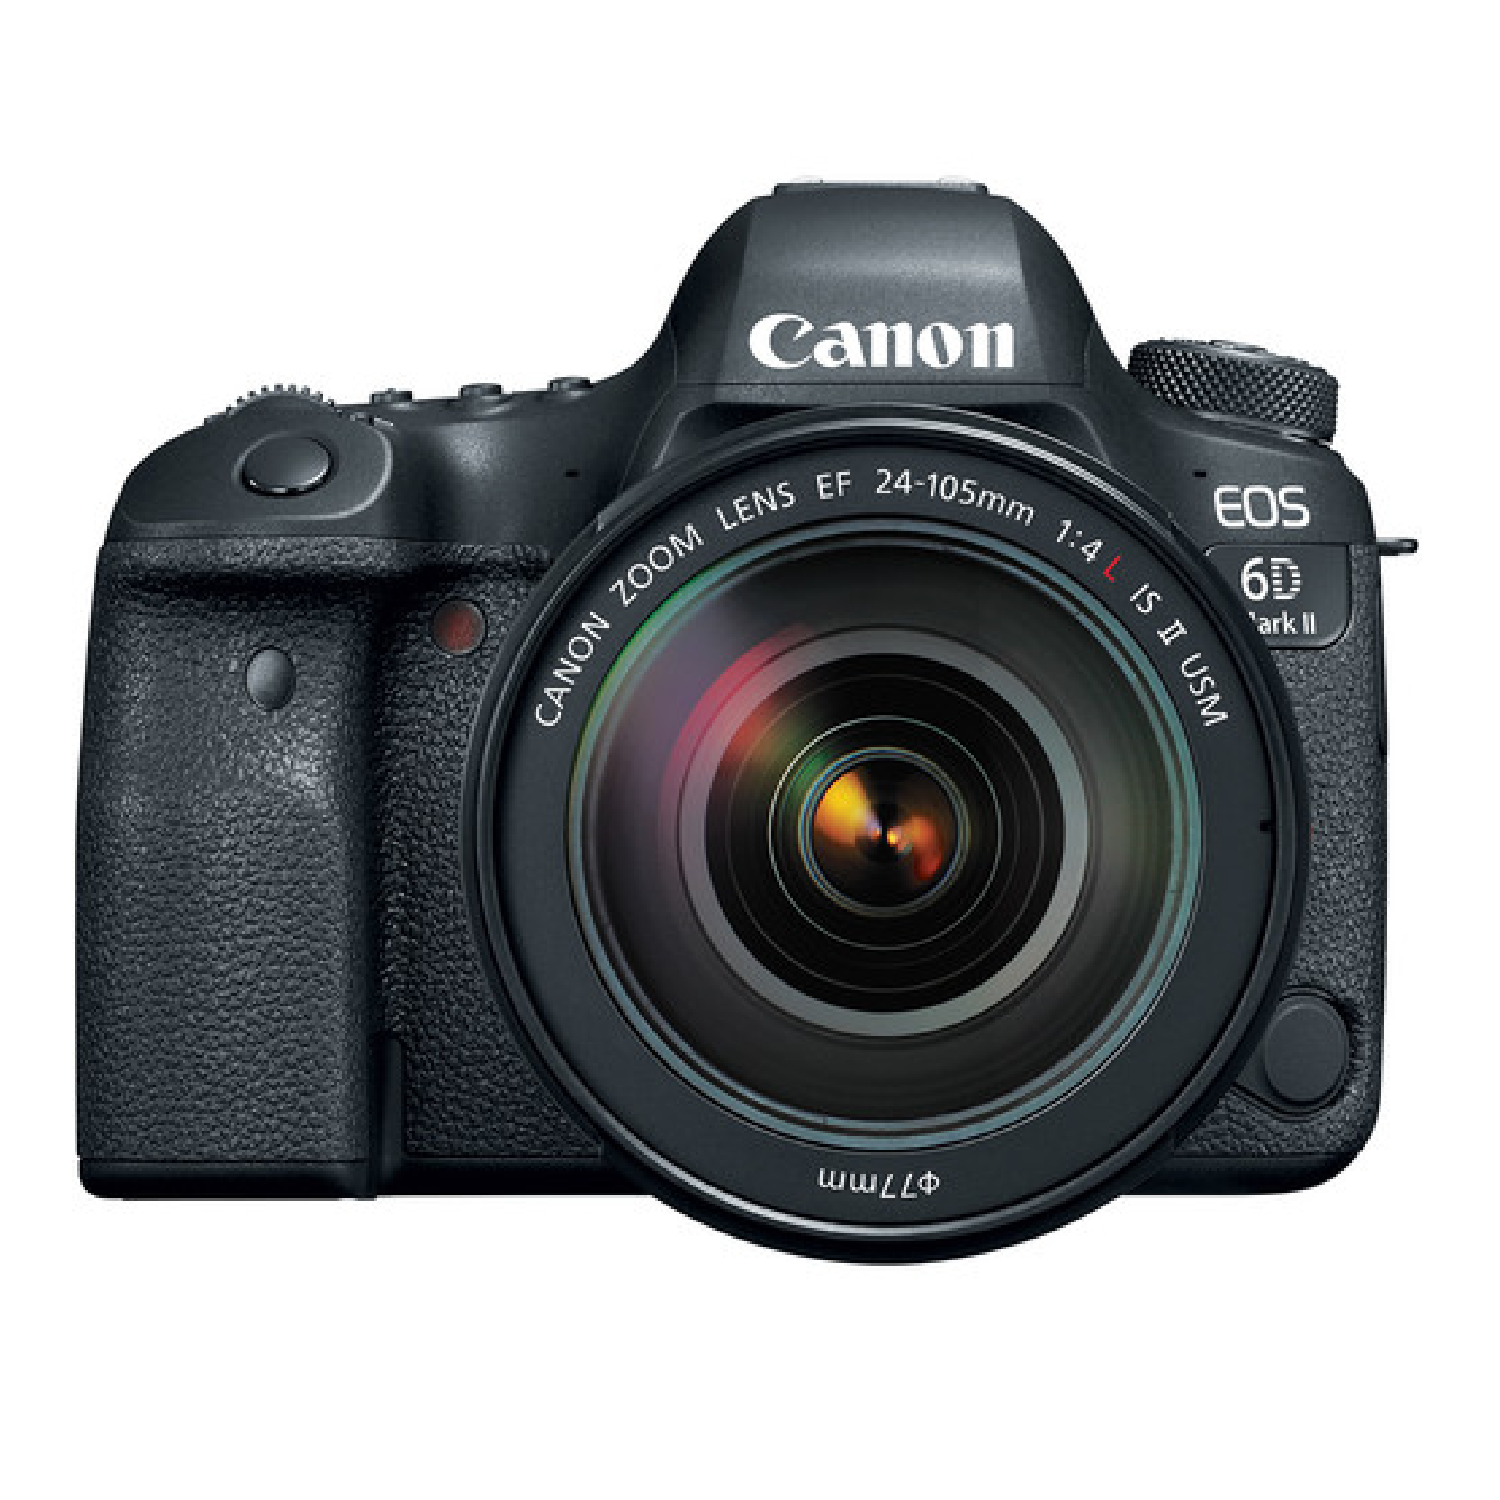 26.2 Megapixel CMOS Sensor DIGIC 7 Image Processor Full HD Video at 60 fps Digital IS 3 Inches 1.04m Dot Vari Angle Touchscreen LCD Dual Pixel CMOS   EOS 6D MII with 24-105 L IS II canon